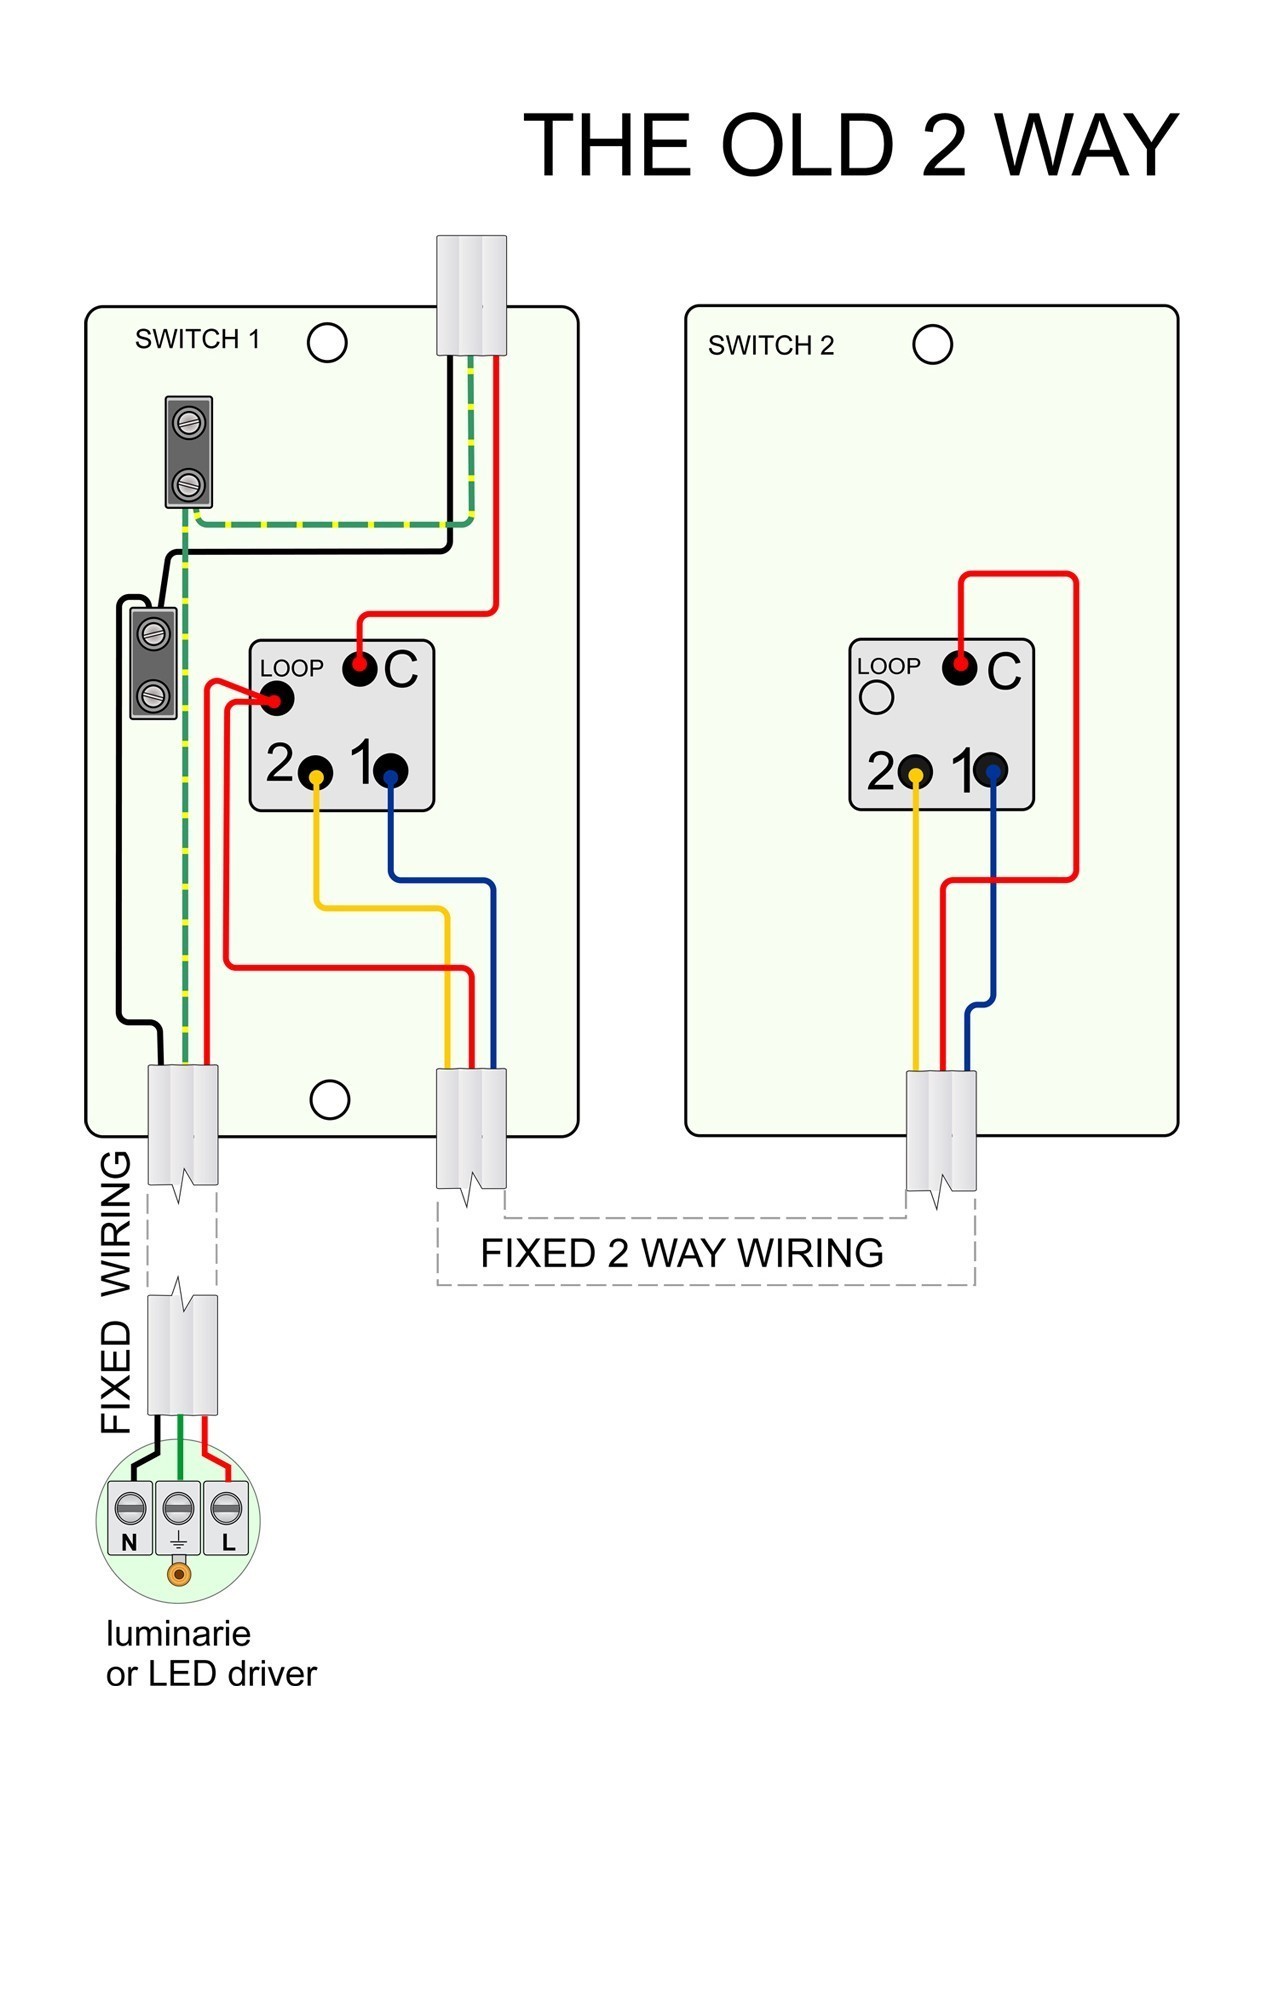 Wiring Diagram For Light With Two Switches Best Two Way Switch Wiring Diagram Nz New Light Fresh 2 Wiring